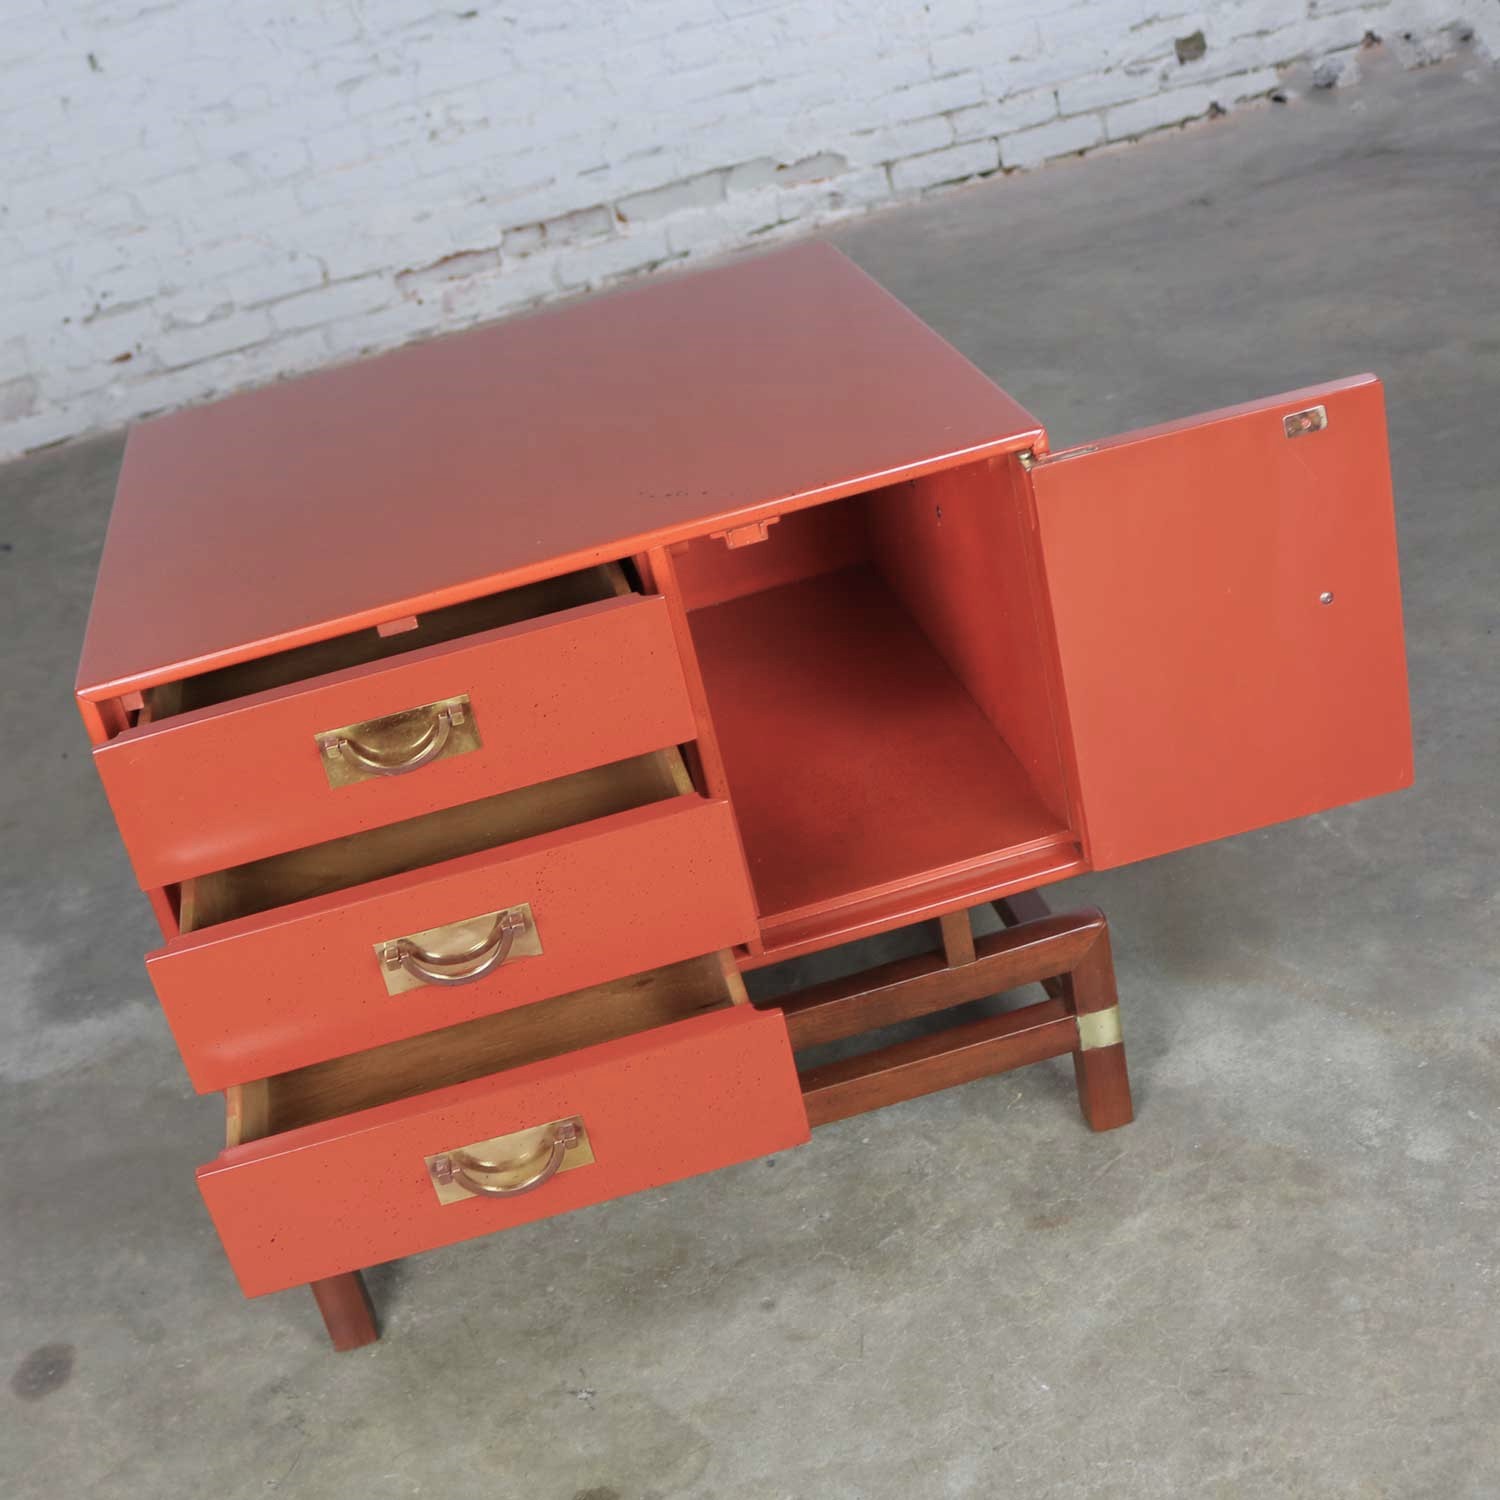 Vintage Red Campaign Style End Table with Drawers & Door & Brass Detail by Hickory